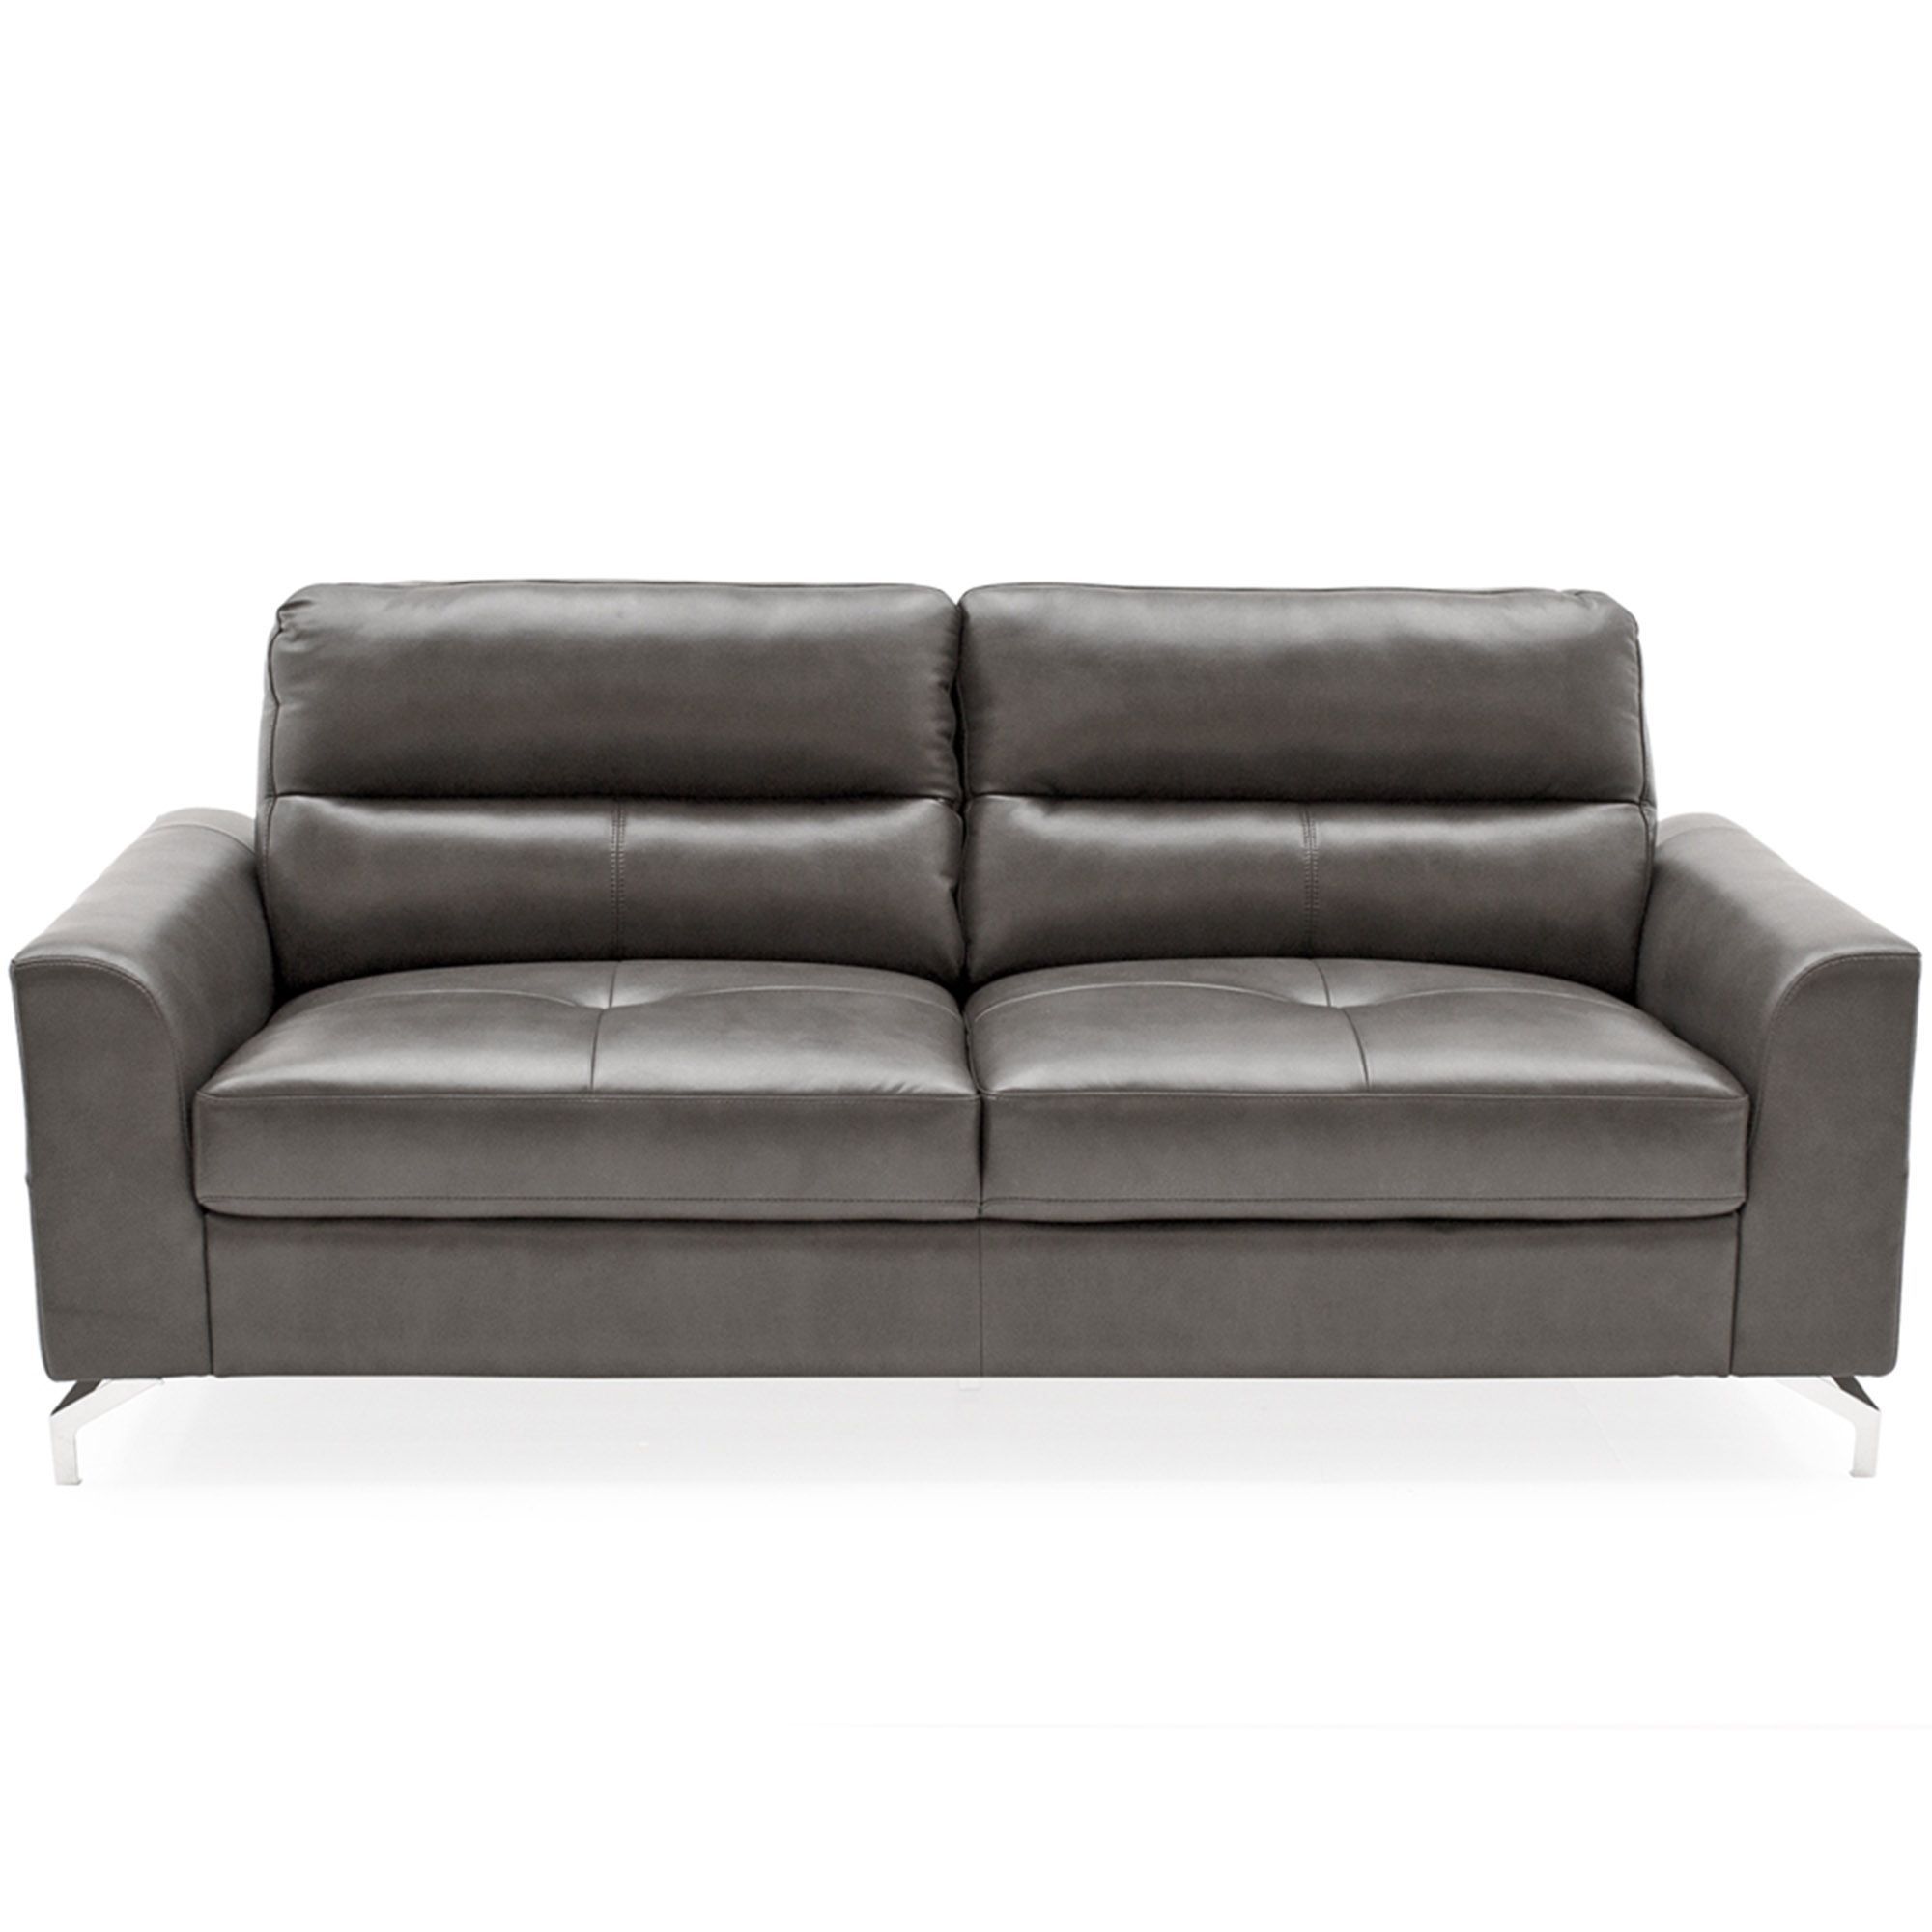 Lambro 3 Seater Sofa Grey Faux Leather – All Sofa Collections – Meubles Throughout Traditional 3 Seater Faux Leather Sofas (View 6 of 20)